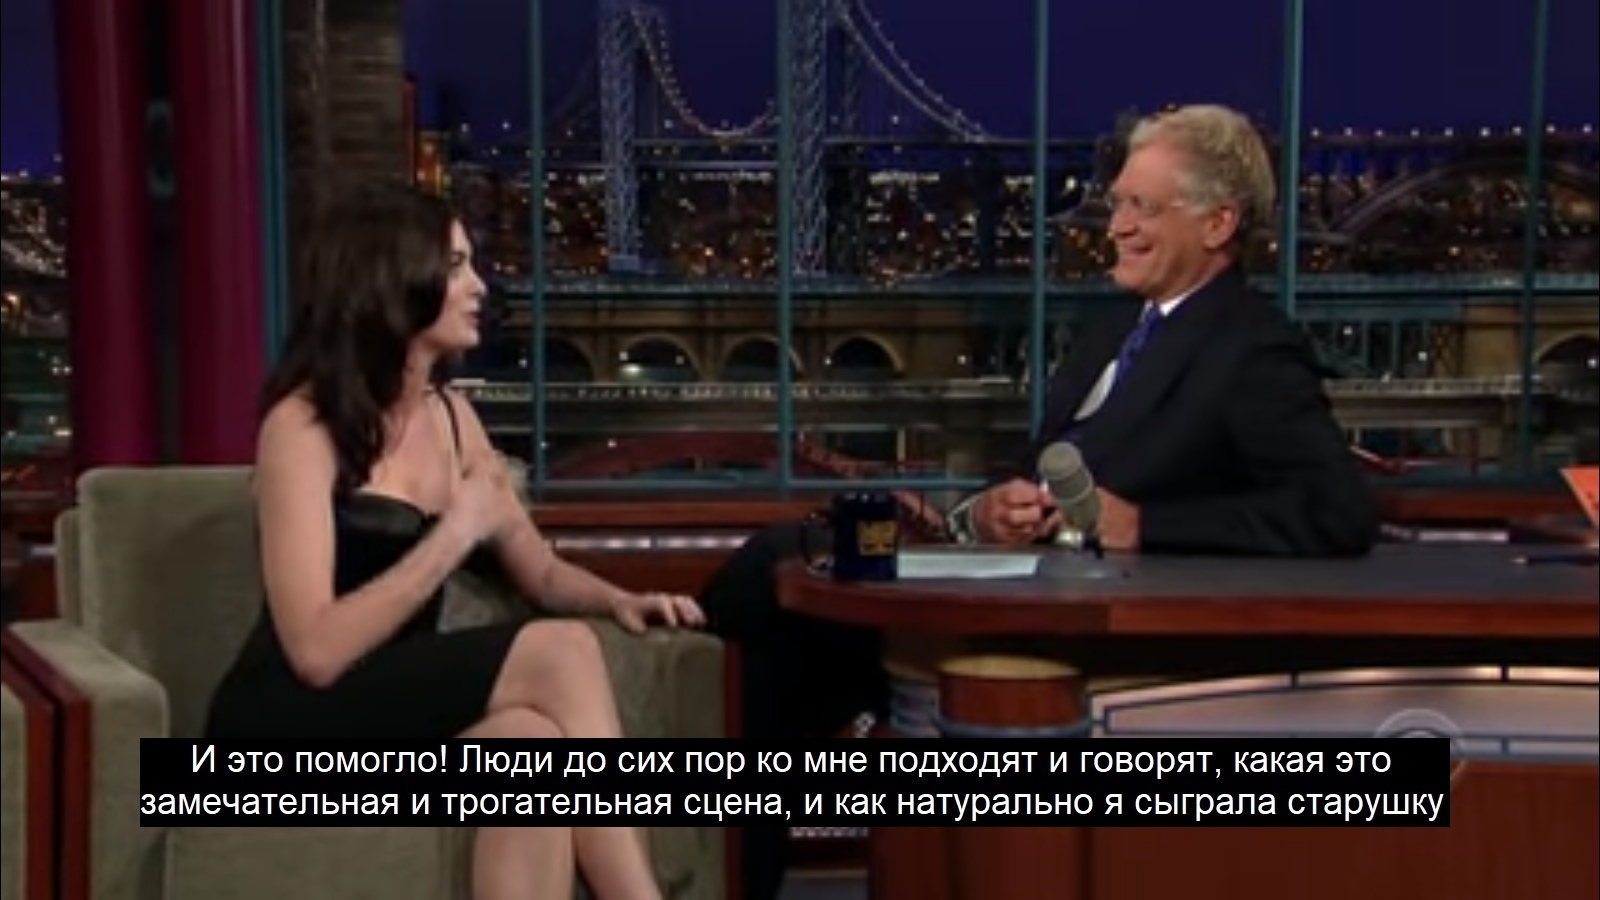 Acting Anne Hathaway - Ann Hataway, Actors and actresses, Celebrities, Storyboard, Interview, Movies, Jane Austen, Humor, , Scene from the movie, Longpost, Alcohol, Hangover